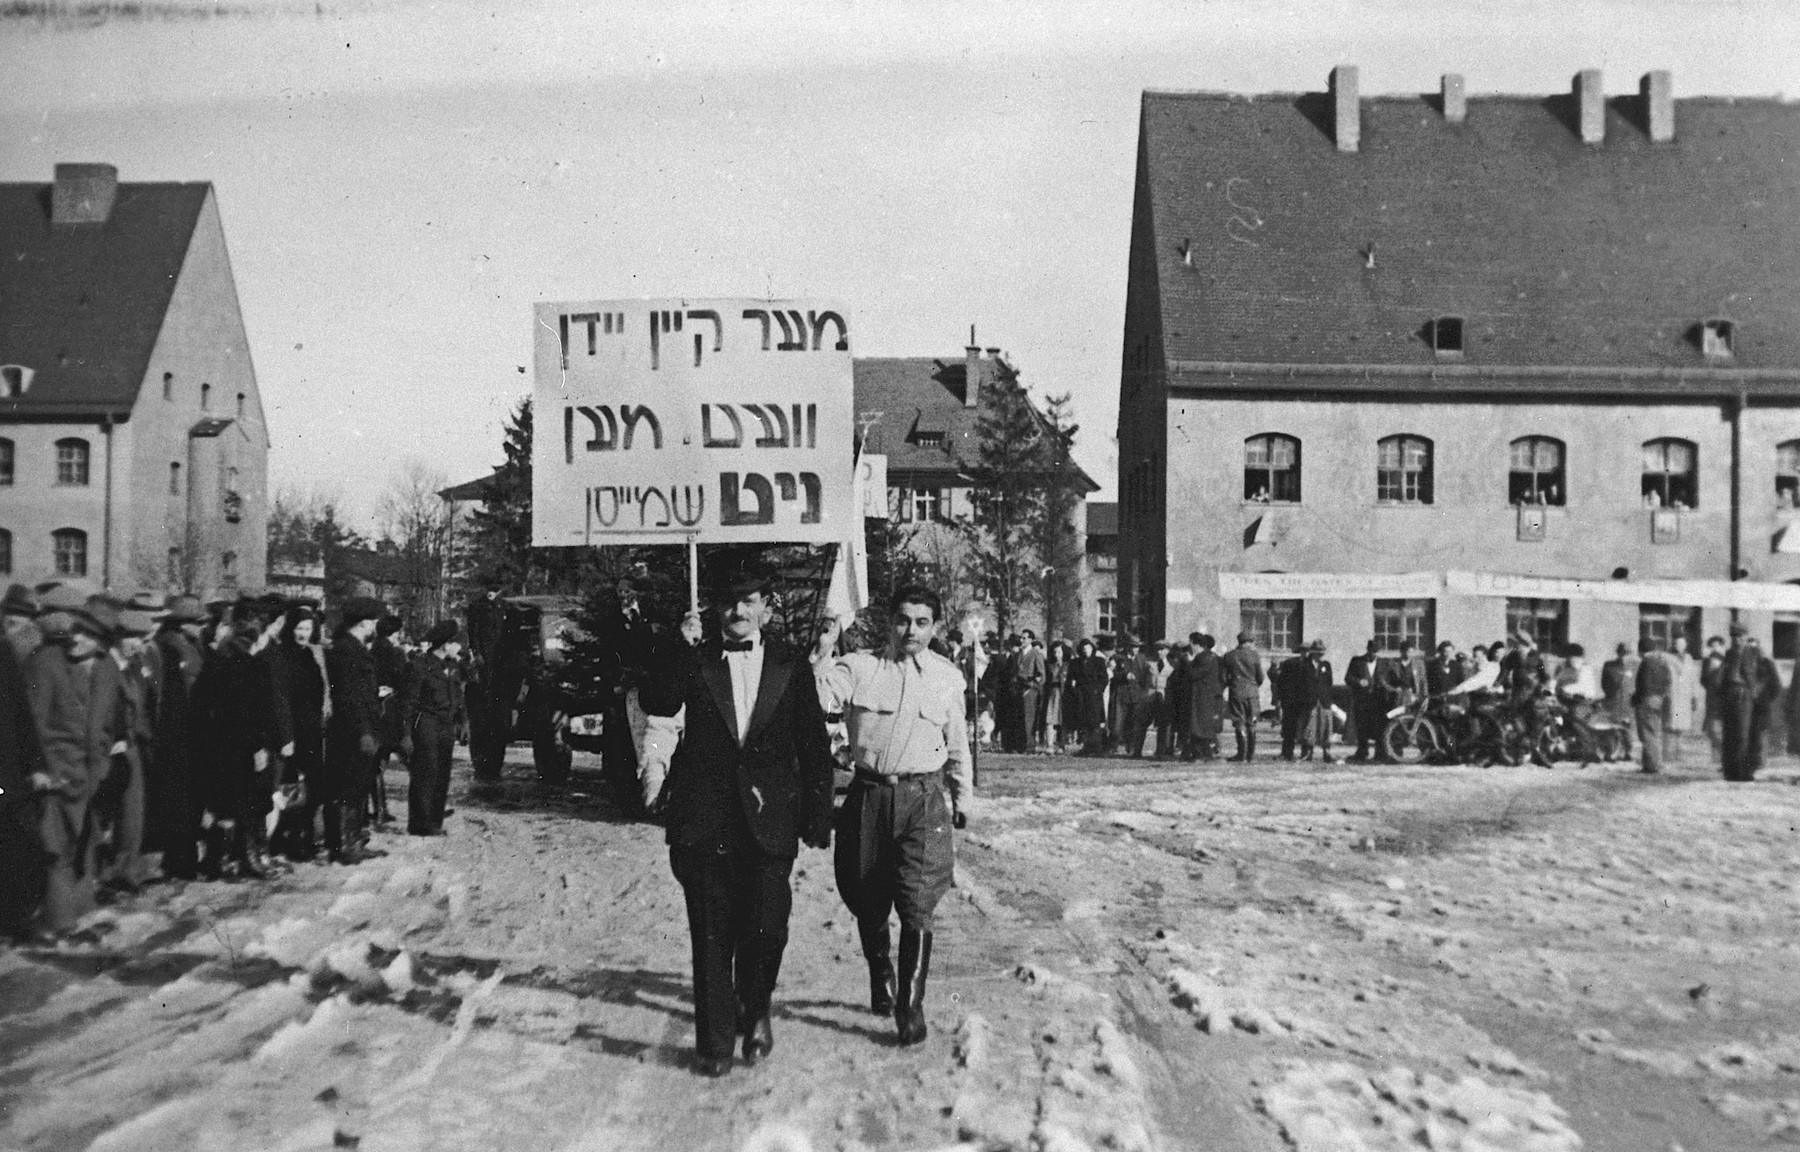 Jews in the Landsberg DP camp march in a Zionist demonstration carrying a banner proclaiming "No longer will Jews be whipped."